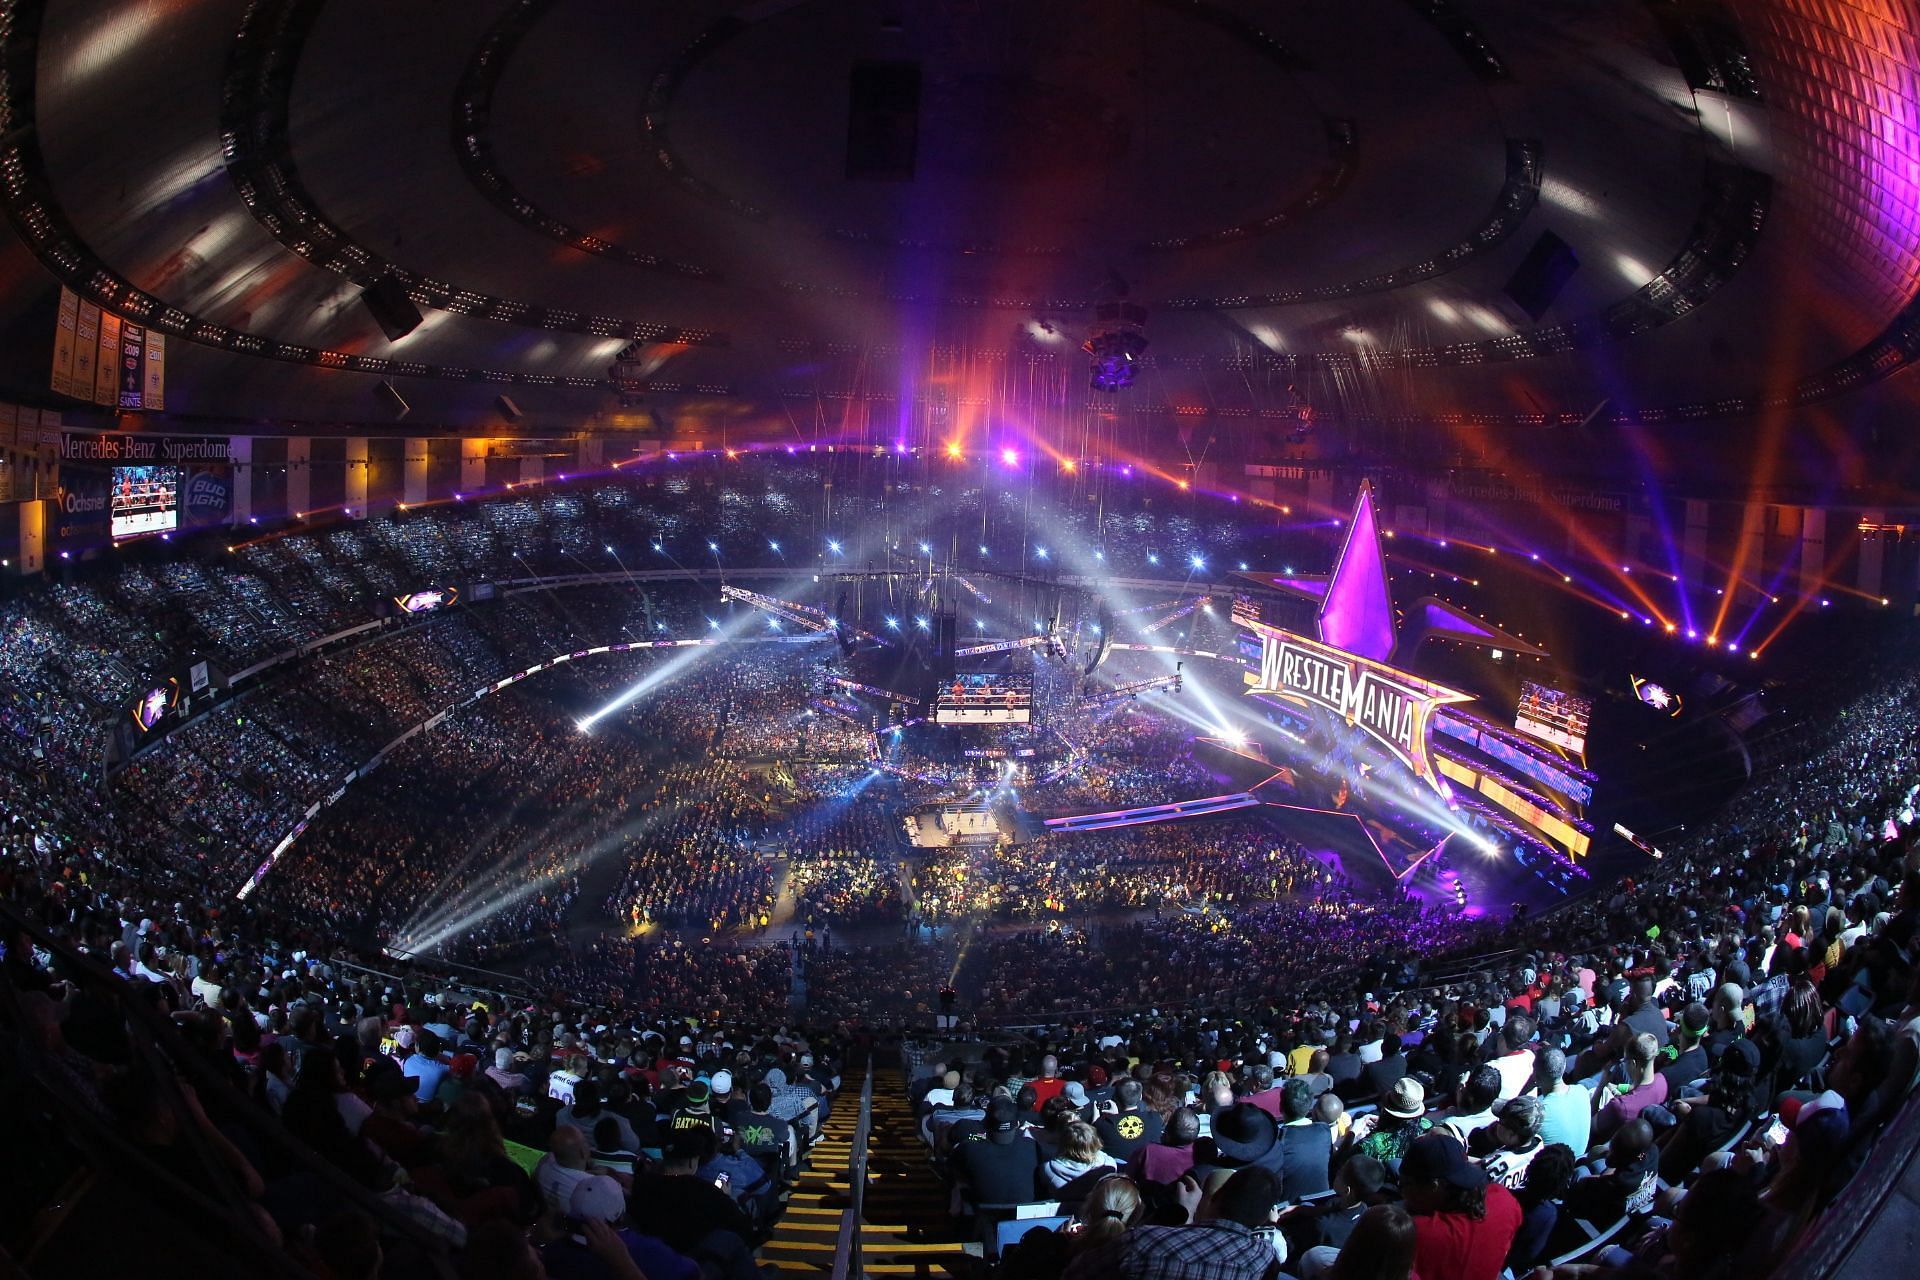 WrestleMania 30 was hosted in New Orleans, Louisiana